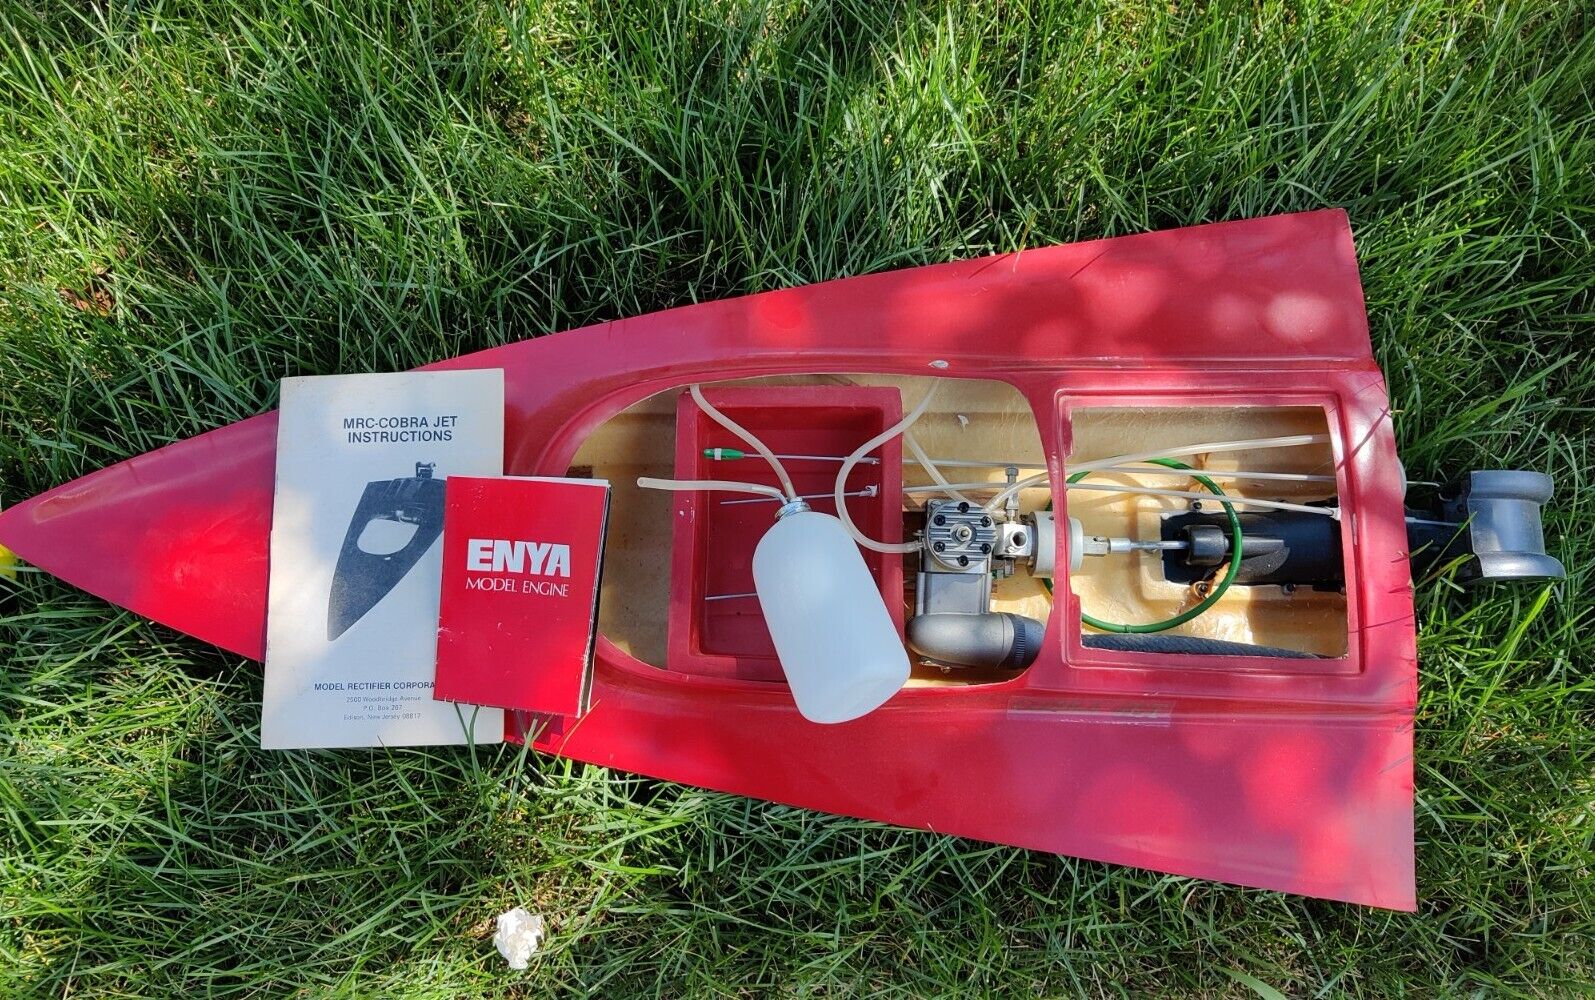 Mrc Cobra Jet RC boat with Enya 40 Model 6002 Engine. As is for part or repair.